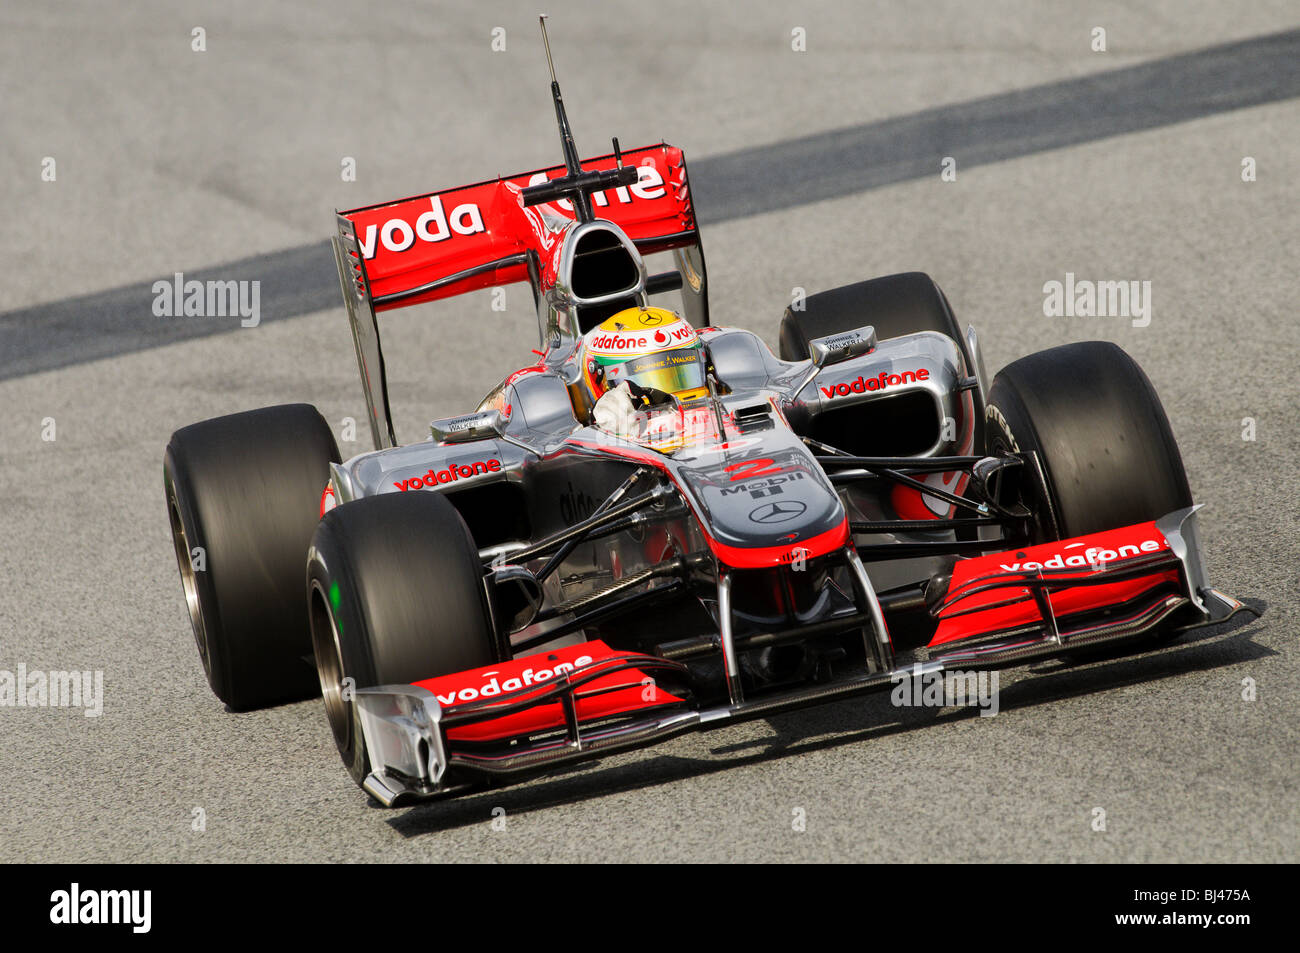 Lewis HAMILTON (GB) in the McLaren-Mercedes MP4-25 race car during Formula  1 Tests Stock Photo - Alamy